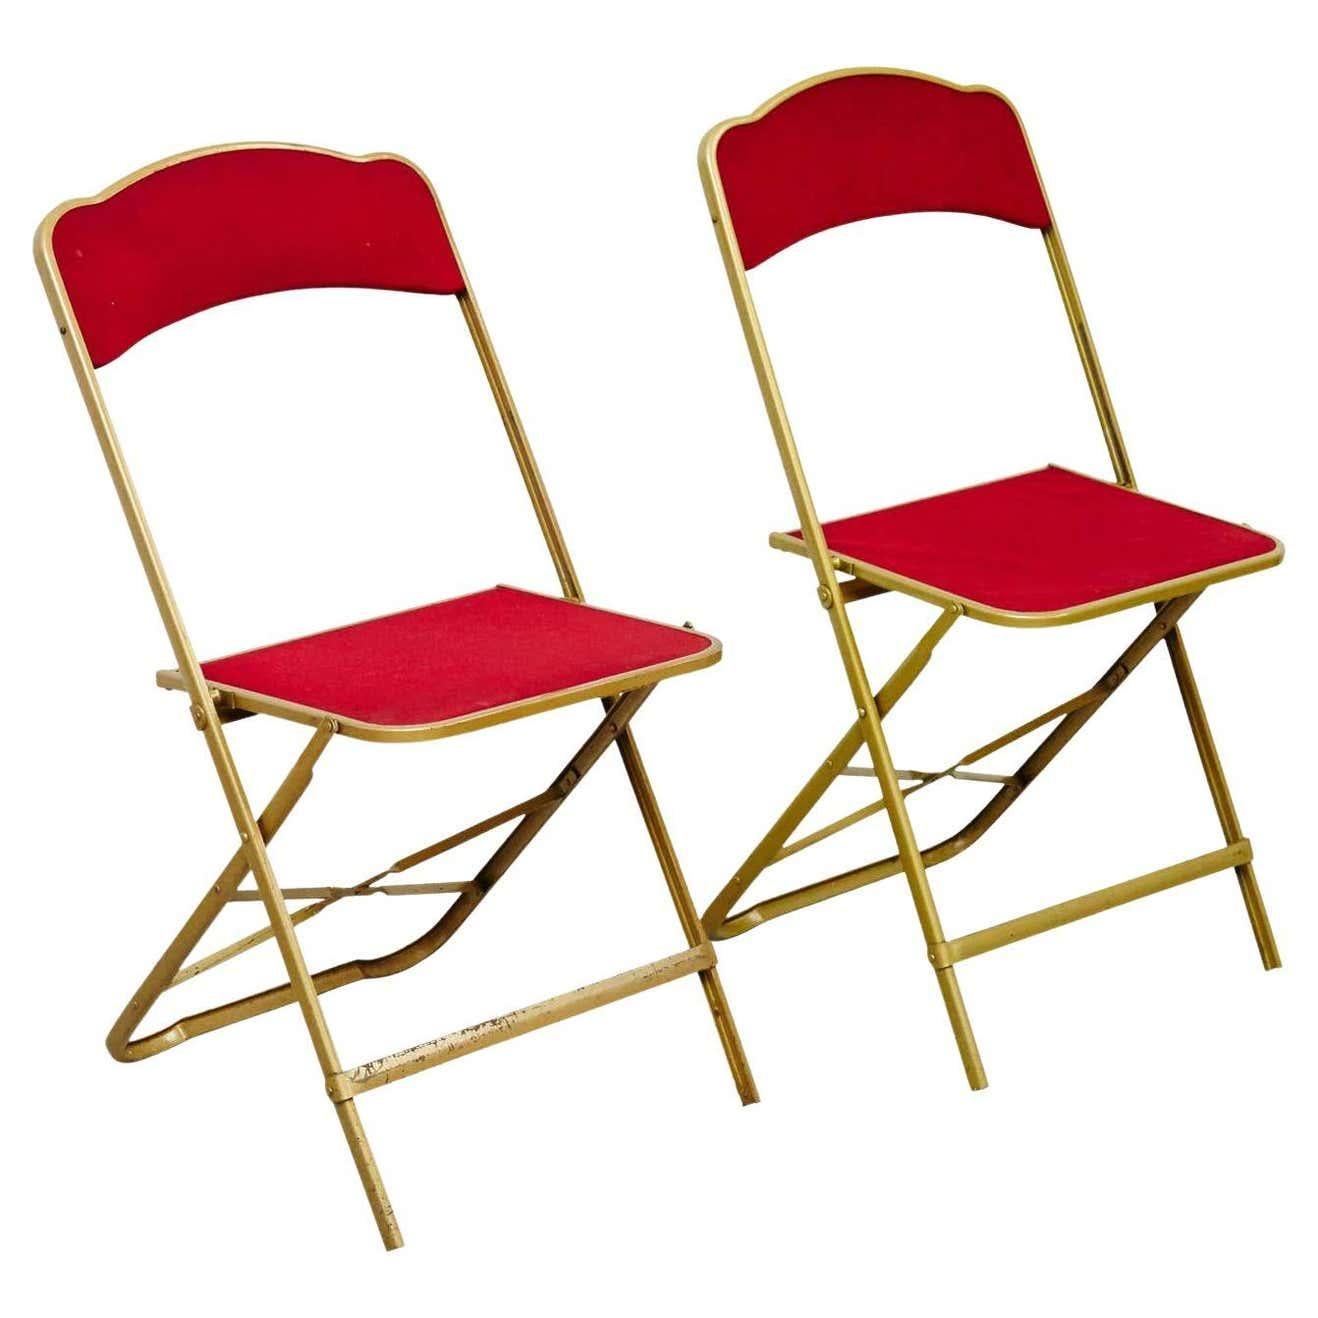 Pair of Antique French Folding Theater Chairs, circa 1960 For Sale 10